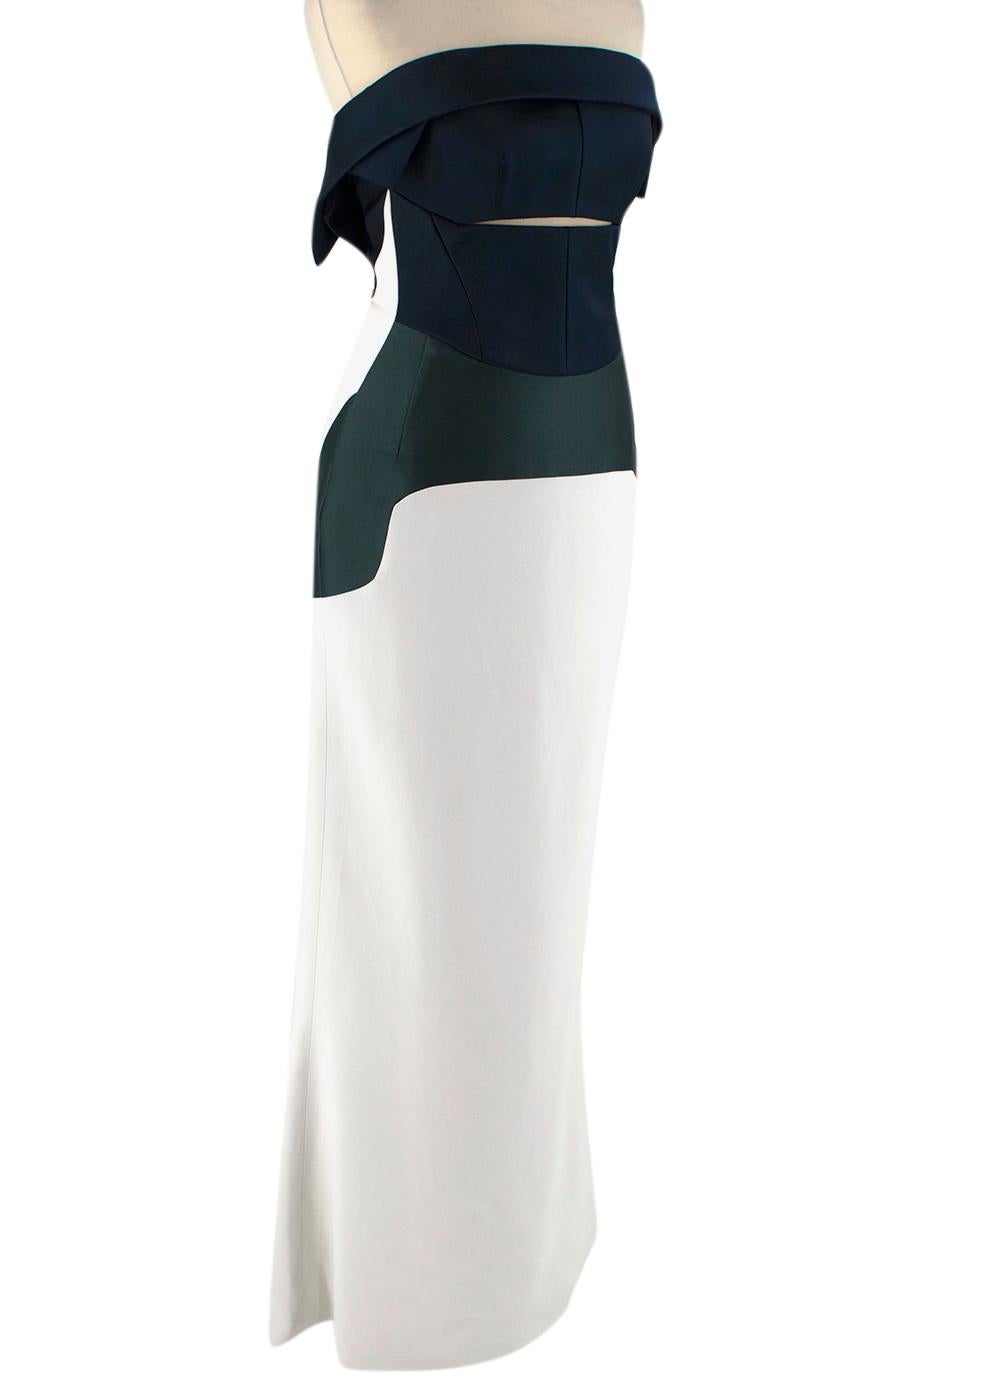 Antonio Berardi Colourblock Strapless Fitted Gown

- Fitted silhouette
- Navy and dark green panelling around the chest and waist
- Concealed zip closure at the back
- Cut-out detail on the chest
- Fully lined

Materials:
The item does not include a